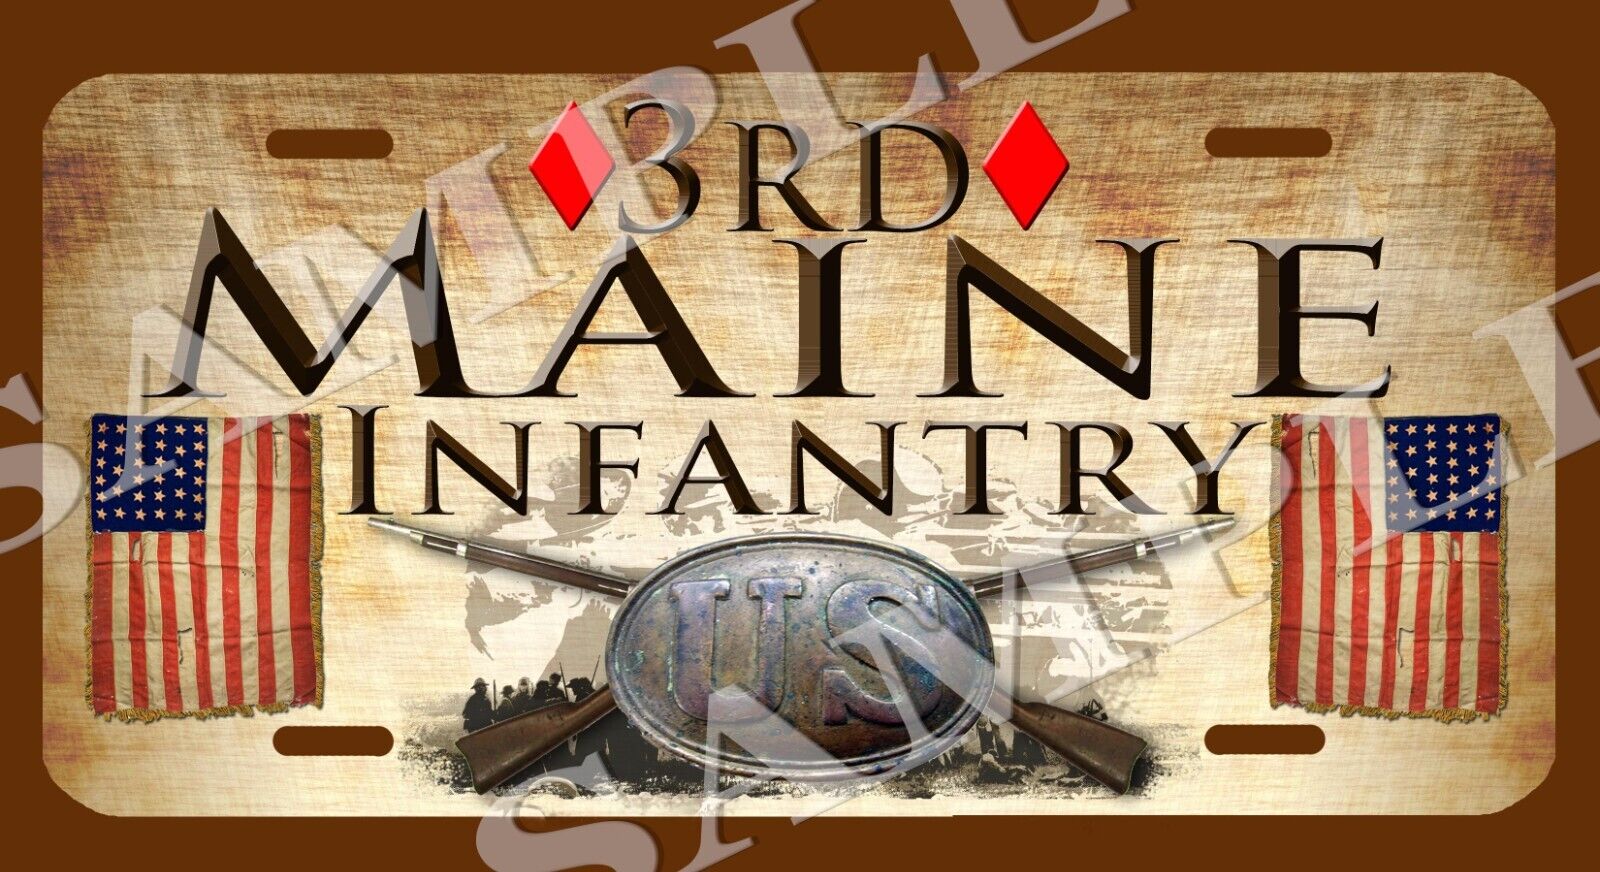 3rd Maine Infantry American Civil War Themed vehicle license plate